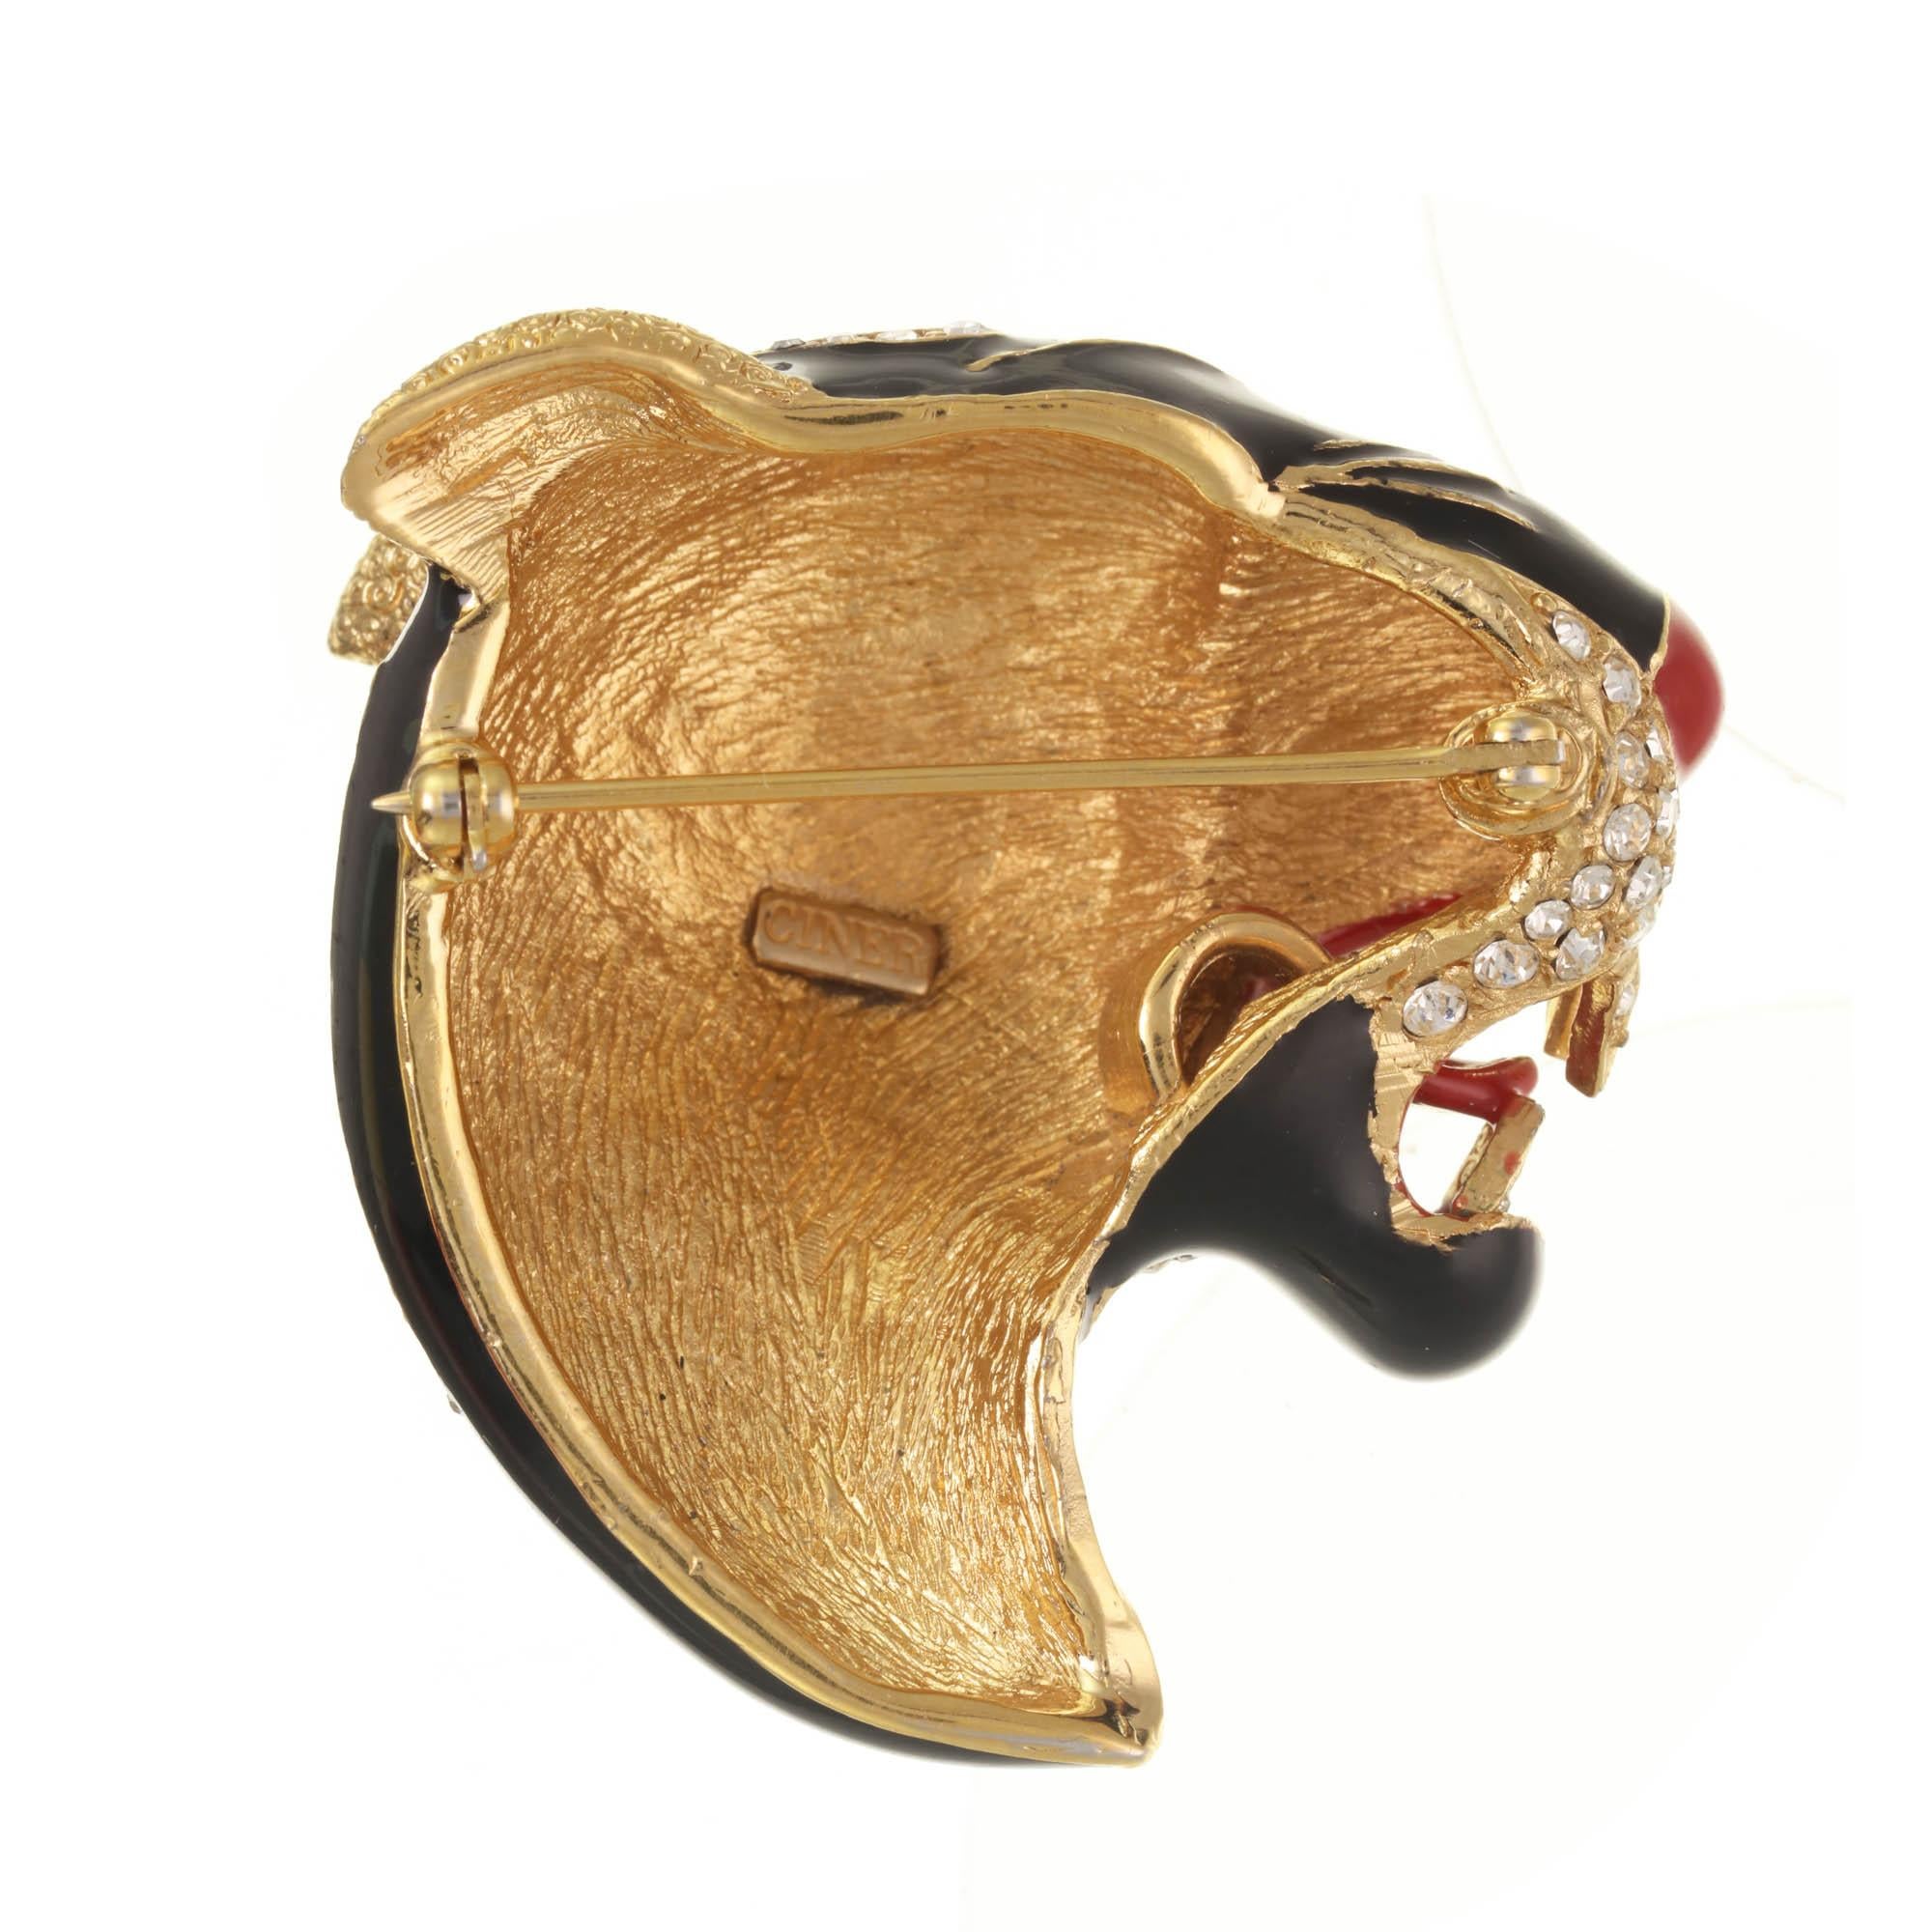 Roaring in fierce fashion, this beautifully detailed Tiger brooch is a must have collectible CINER piece. 

PLEASE NOTE: The pieces available are not vintage and are not reproductions.
CINER uses original models to produce our jewelry today.
If you